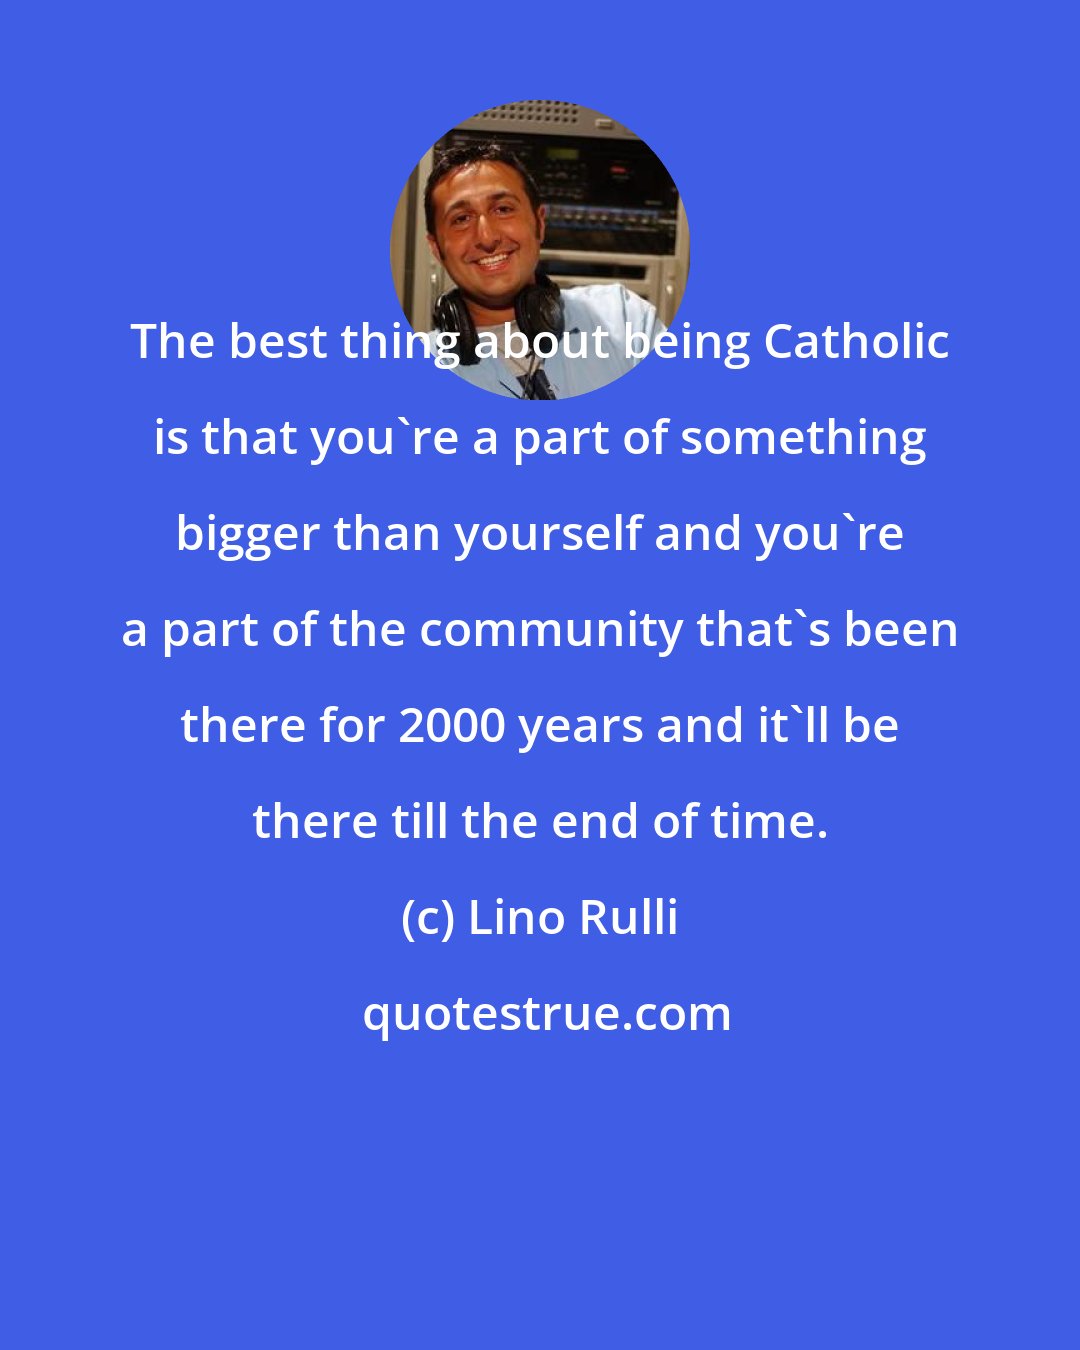 Lino Rulli: The best thing about being Catholic is that you're a part of something bigger than yourself and you're a part of the community that's been there for 2000 years and it'll be there till the end of time.